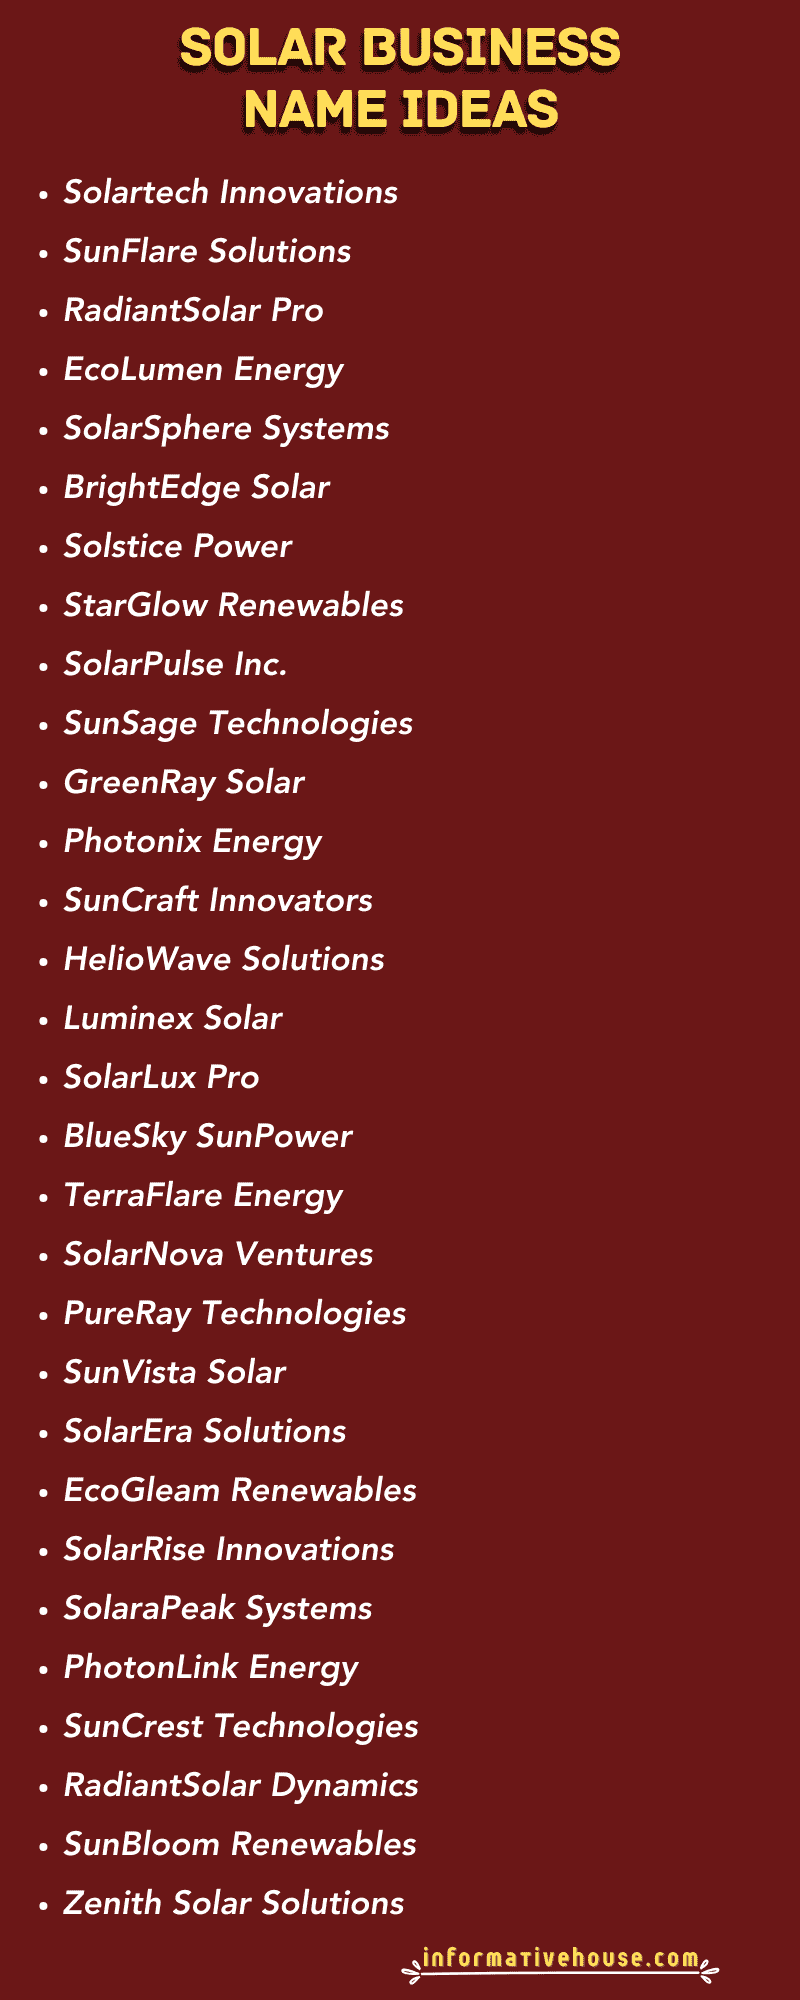 Solar Business Name Ideas for startup